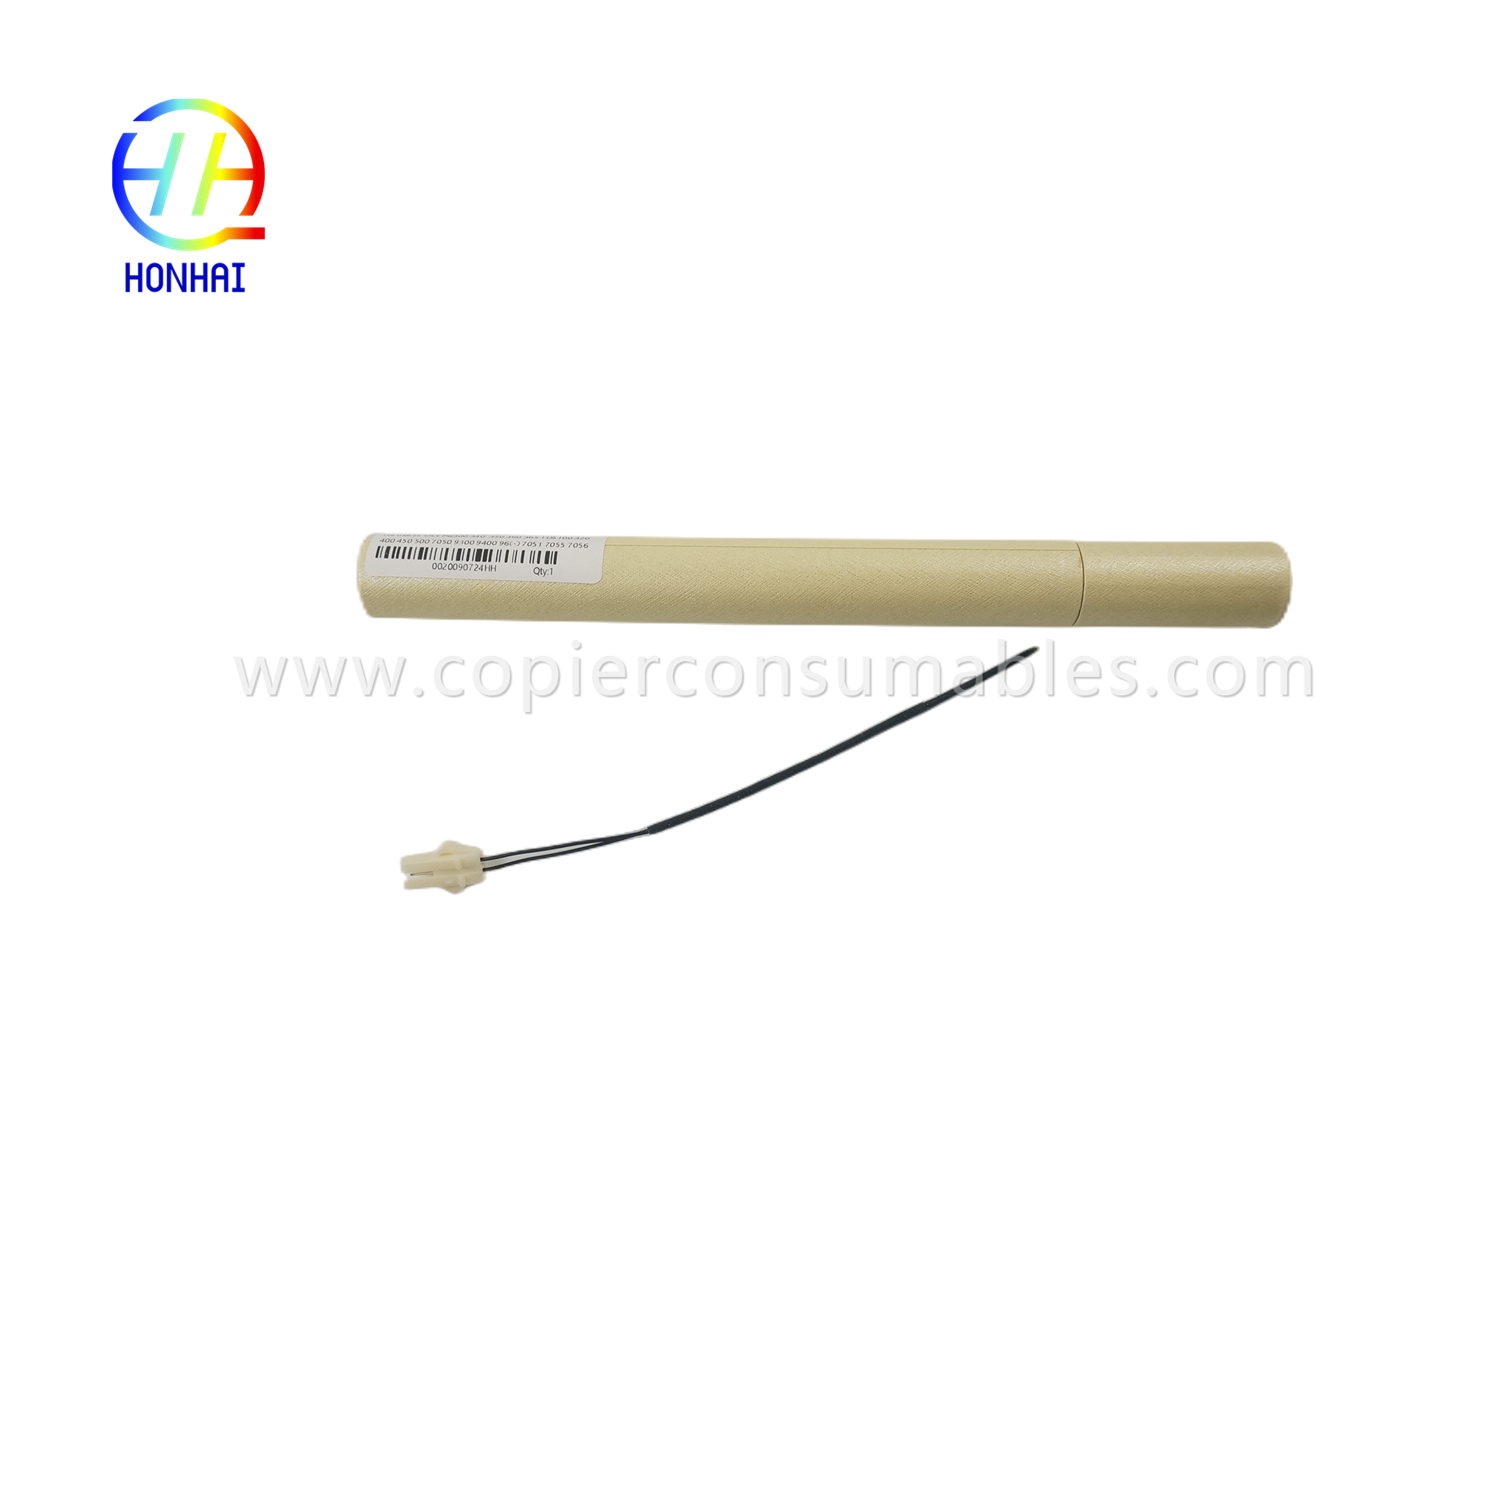 Fuser Thermistor mo OCE Pw300 340 350 360 365 TDS100 320 400 450 500 7050 9300 9400 (4)